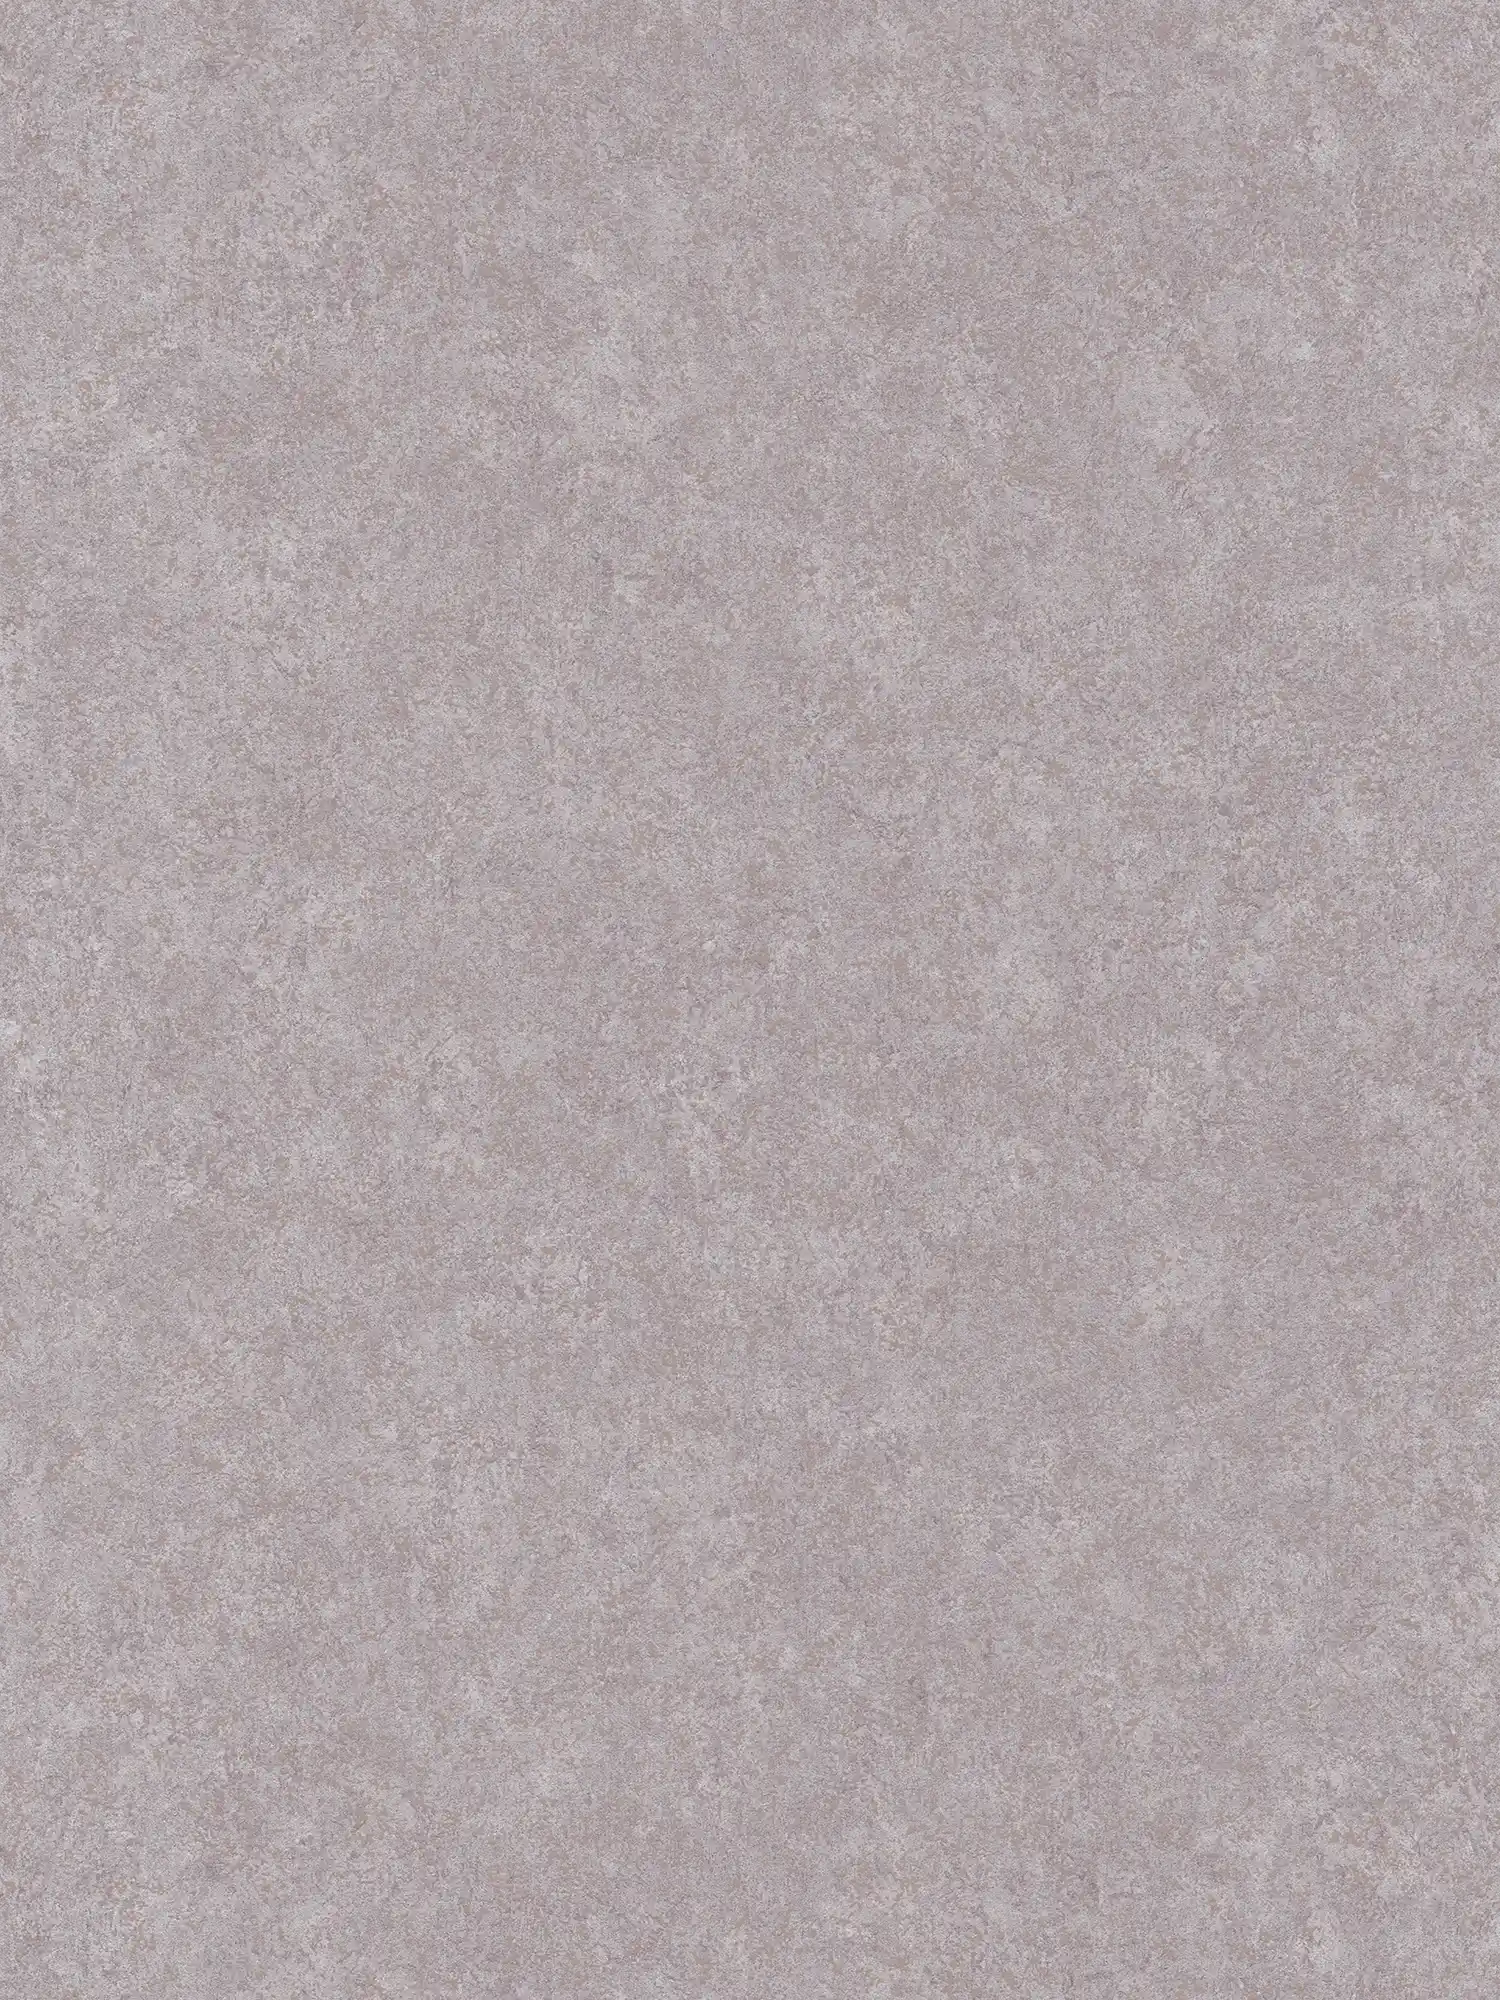 Neutral plaster look wallpaper with matte surface - grey
